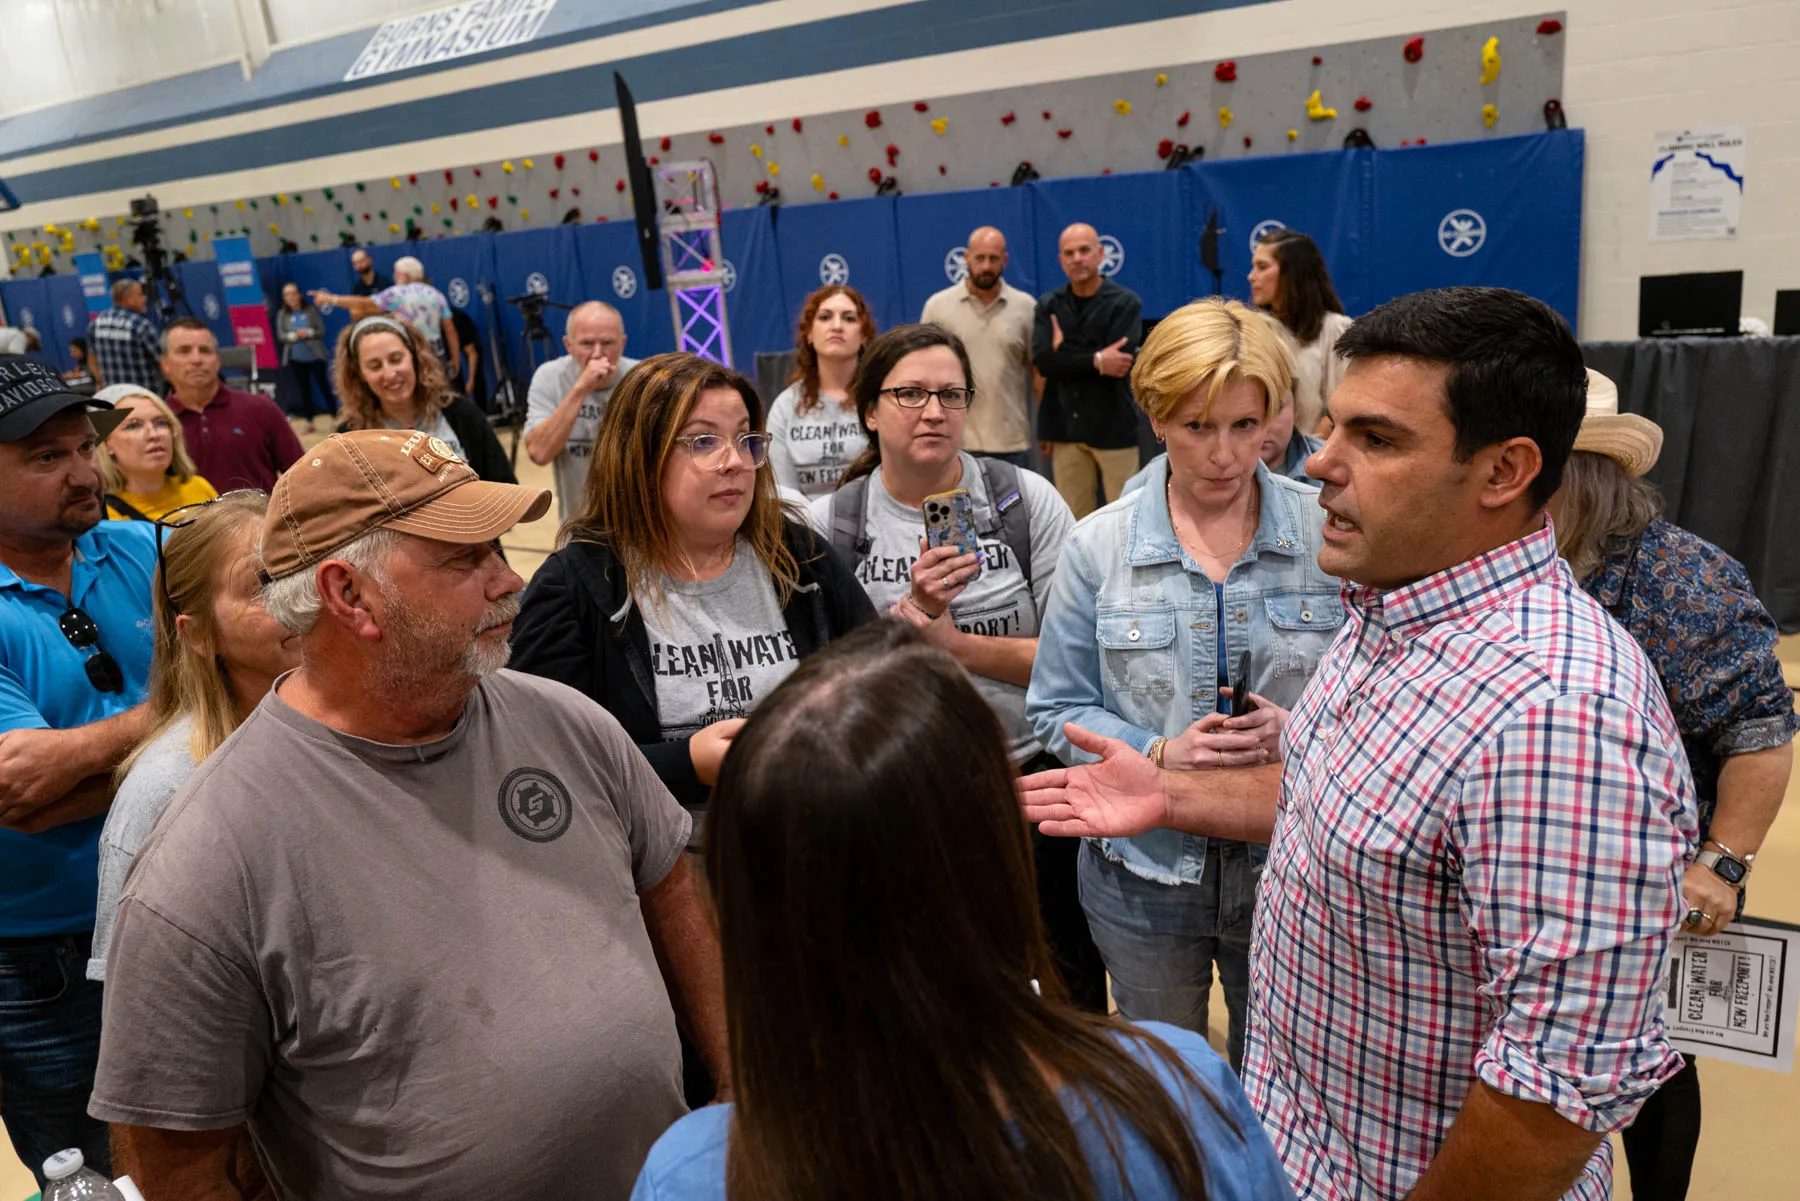 People stand around a man in a plaid shirt at a public meeting